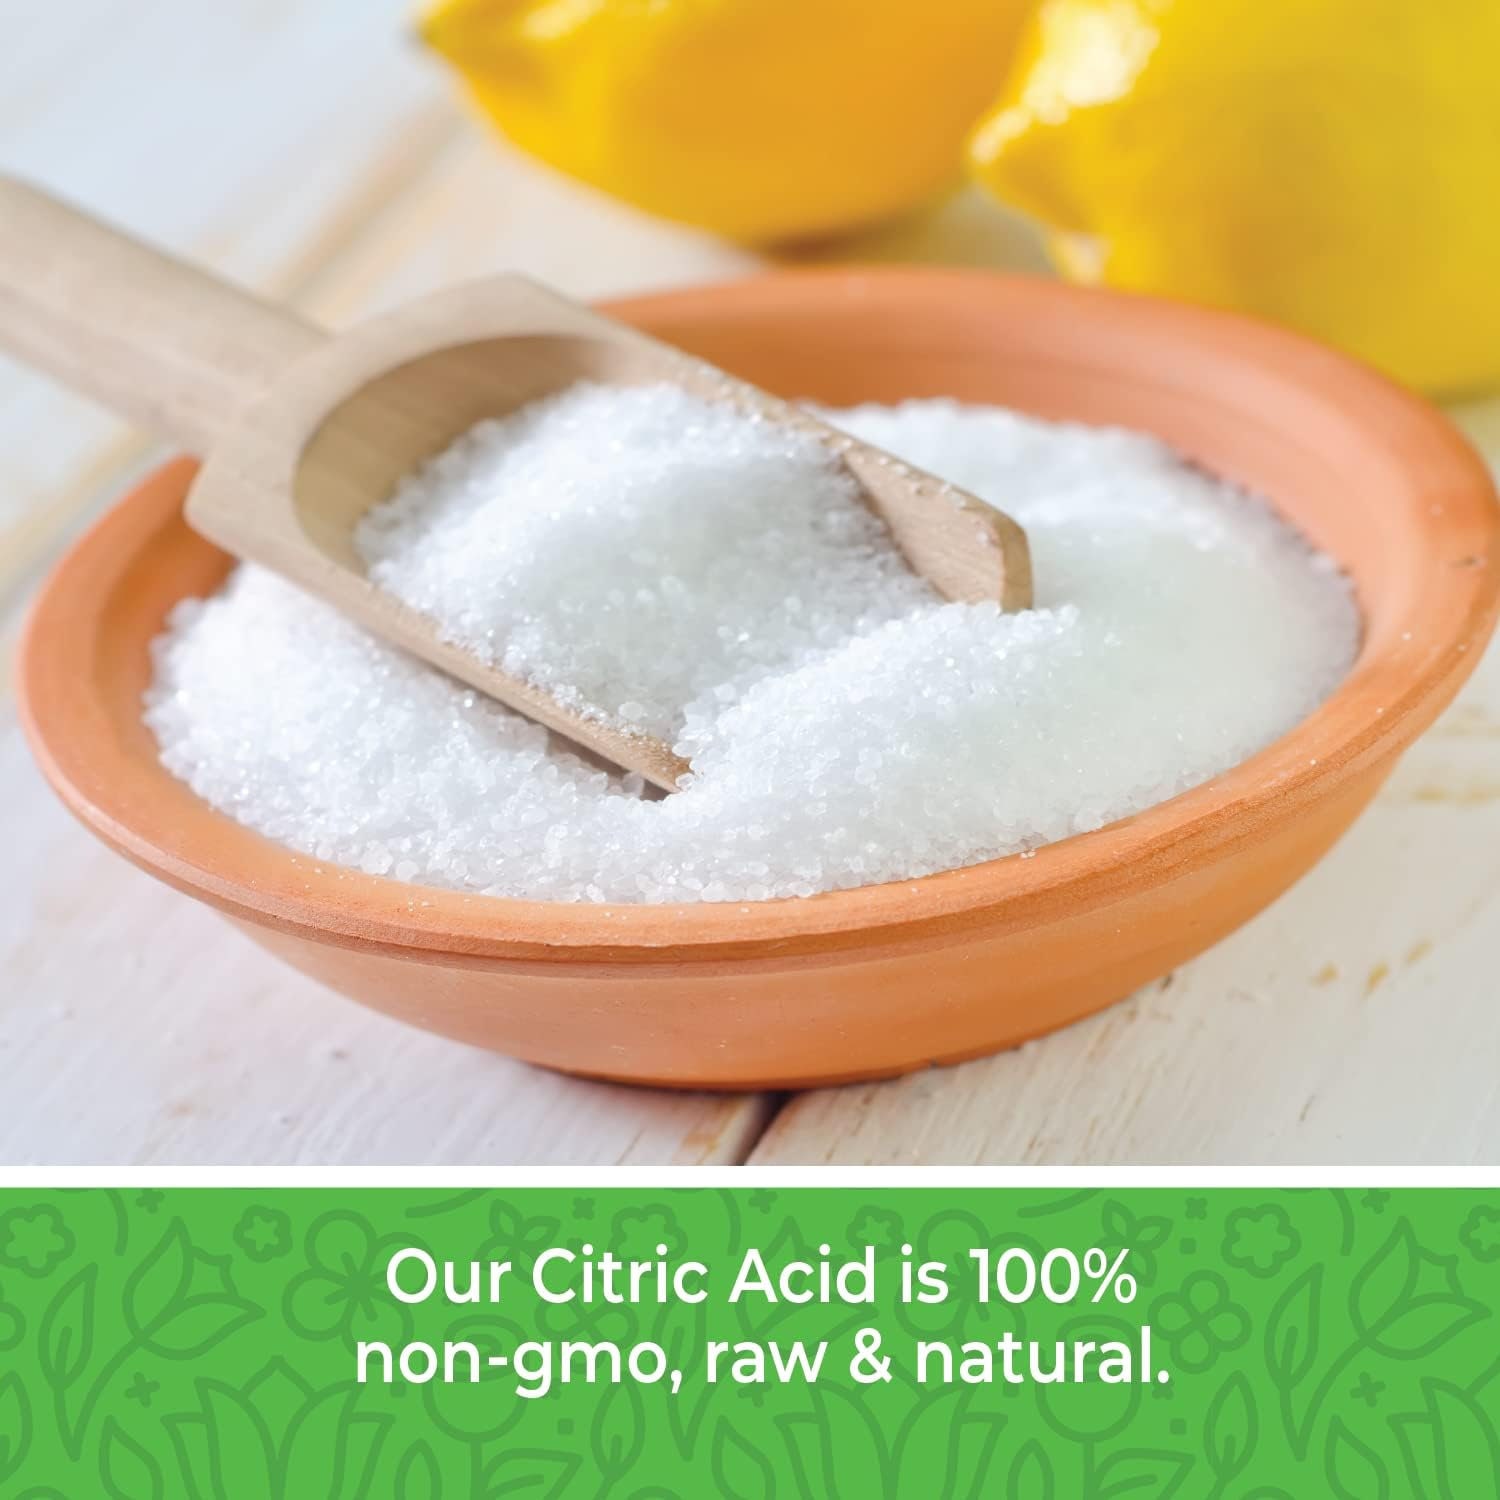 Citric Acid Powder 8 oz. 100% Pure Food Grade, Kosher, NON-GMO, For  Cooking, Baking, Cleaning, Bath Bomb and Soap Making. 